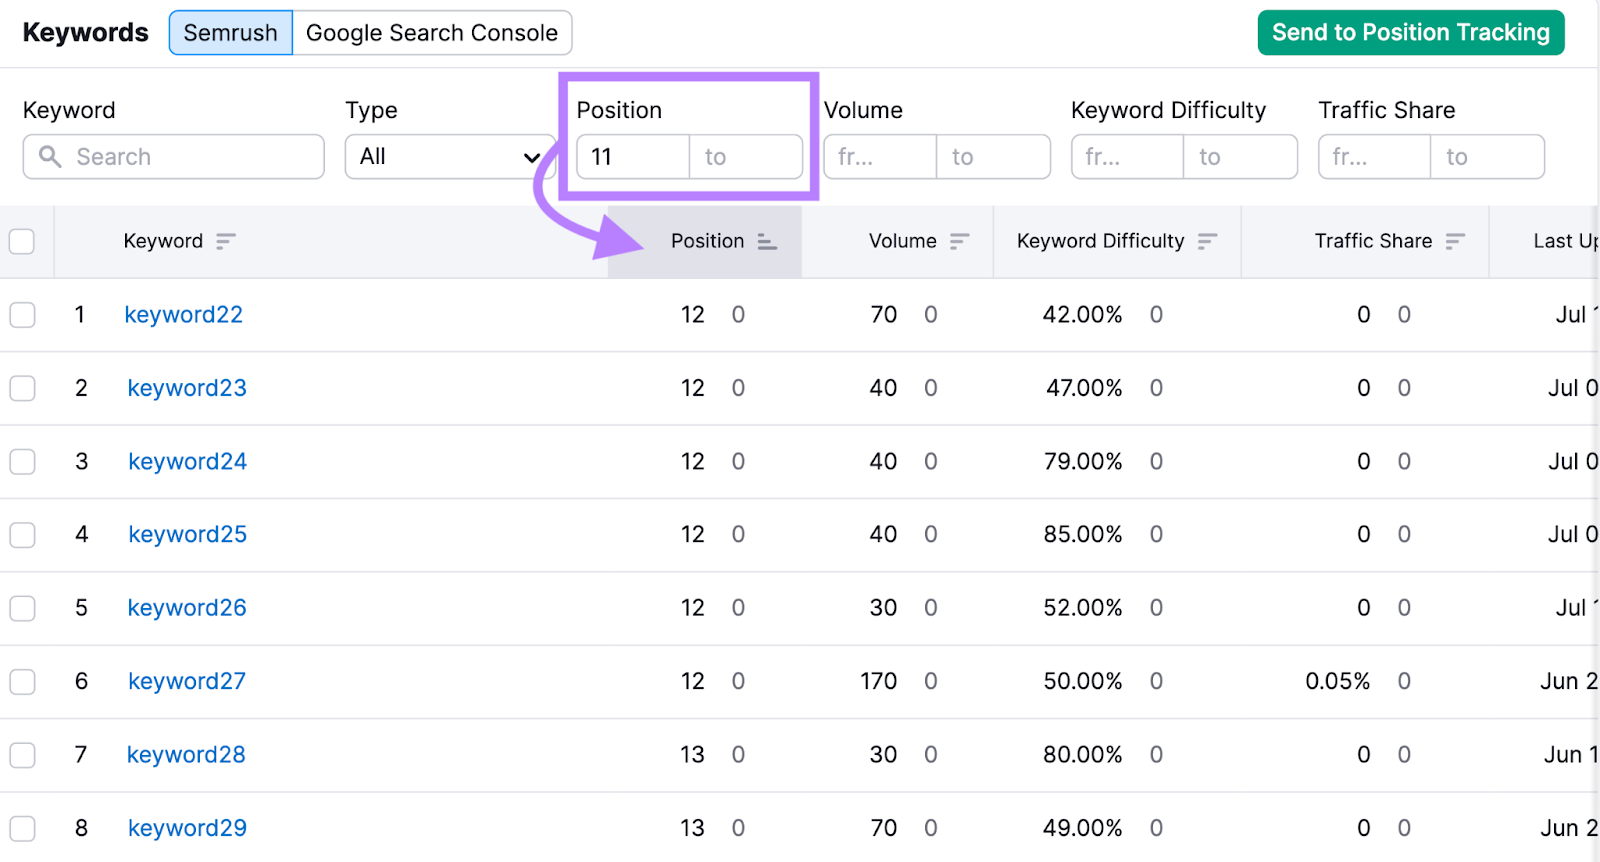 applying "Position" filter to find keywords where your website ranks in position 11 and beyond